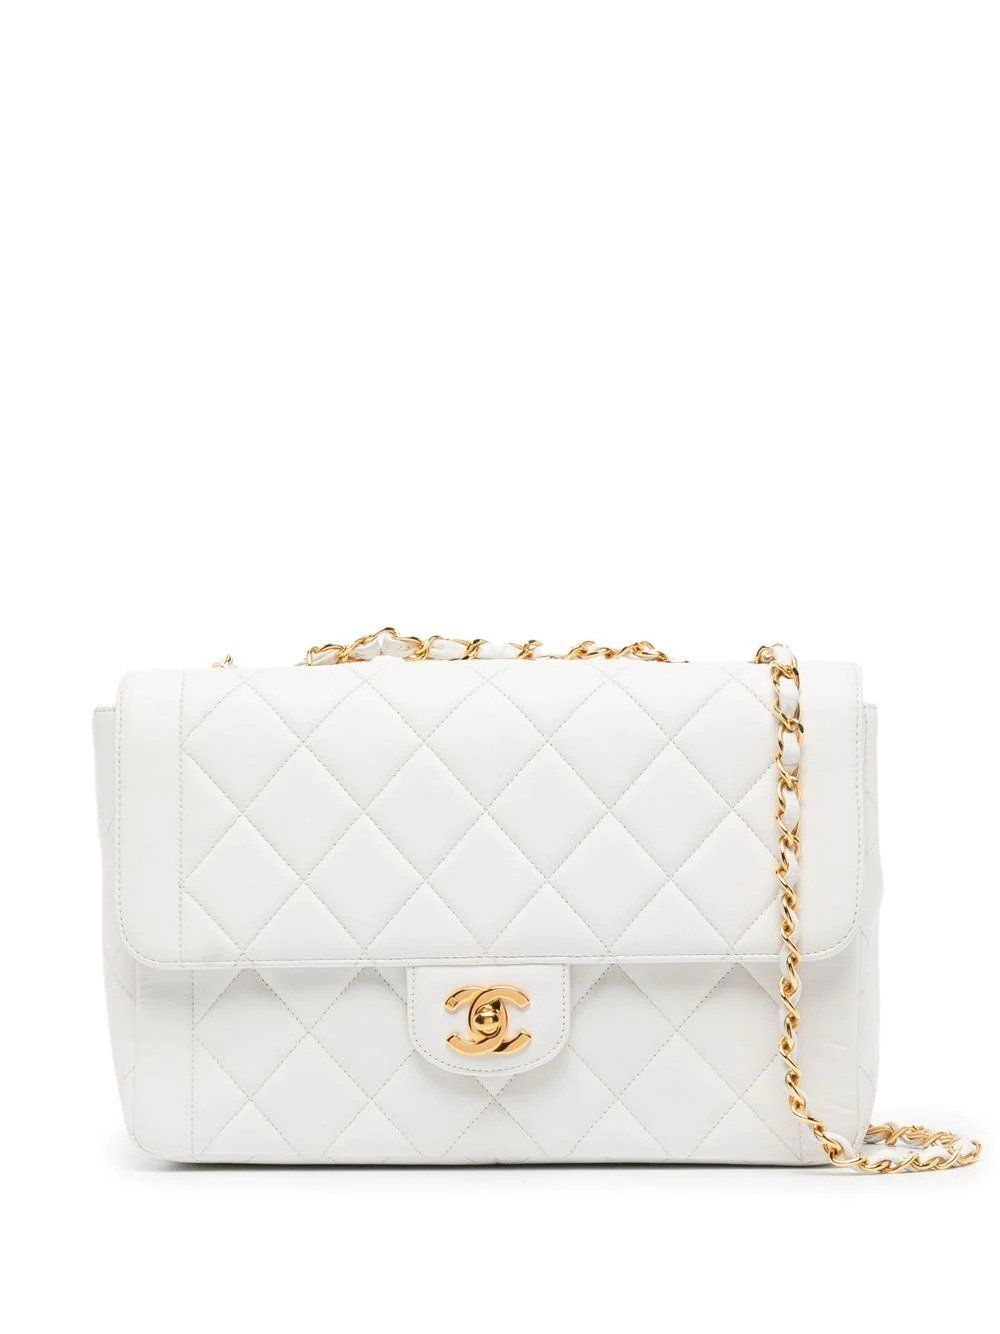 10 Classic Designer Handbag Brands From Chanel to Hermès  Who What Wear UK